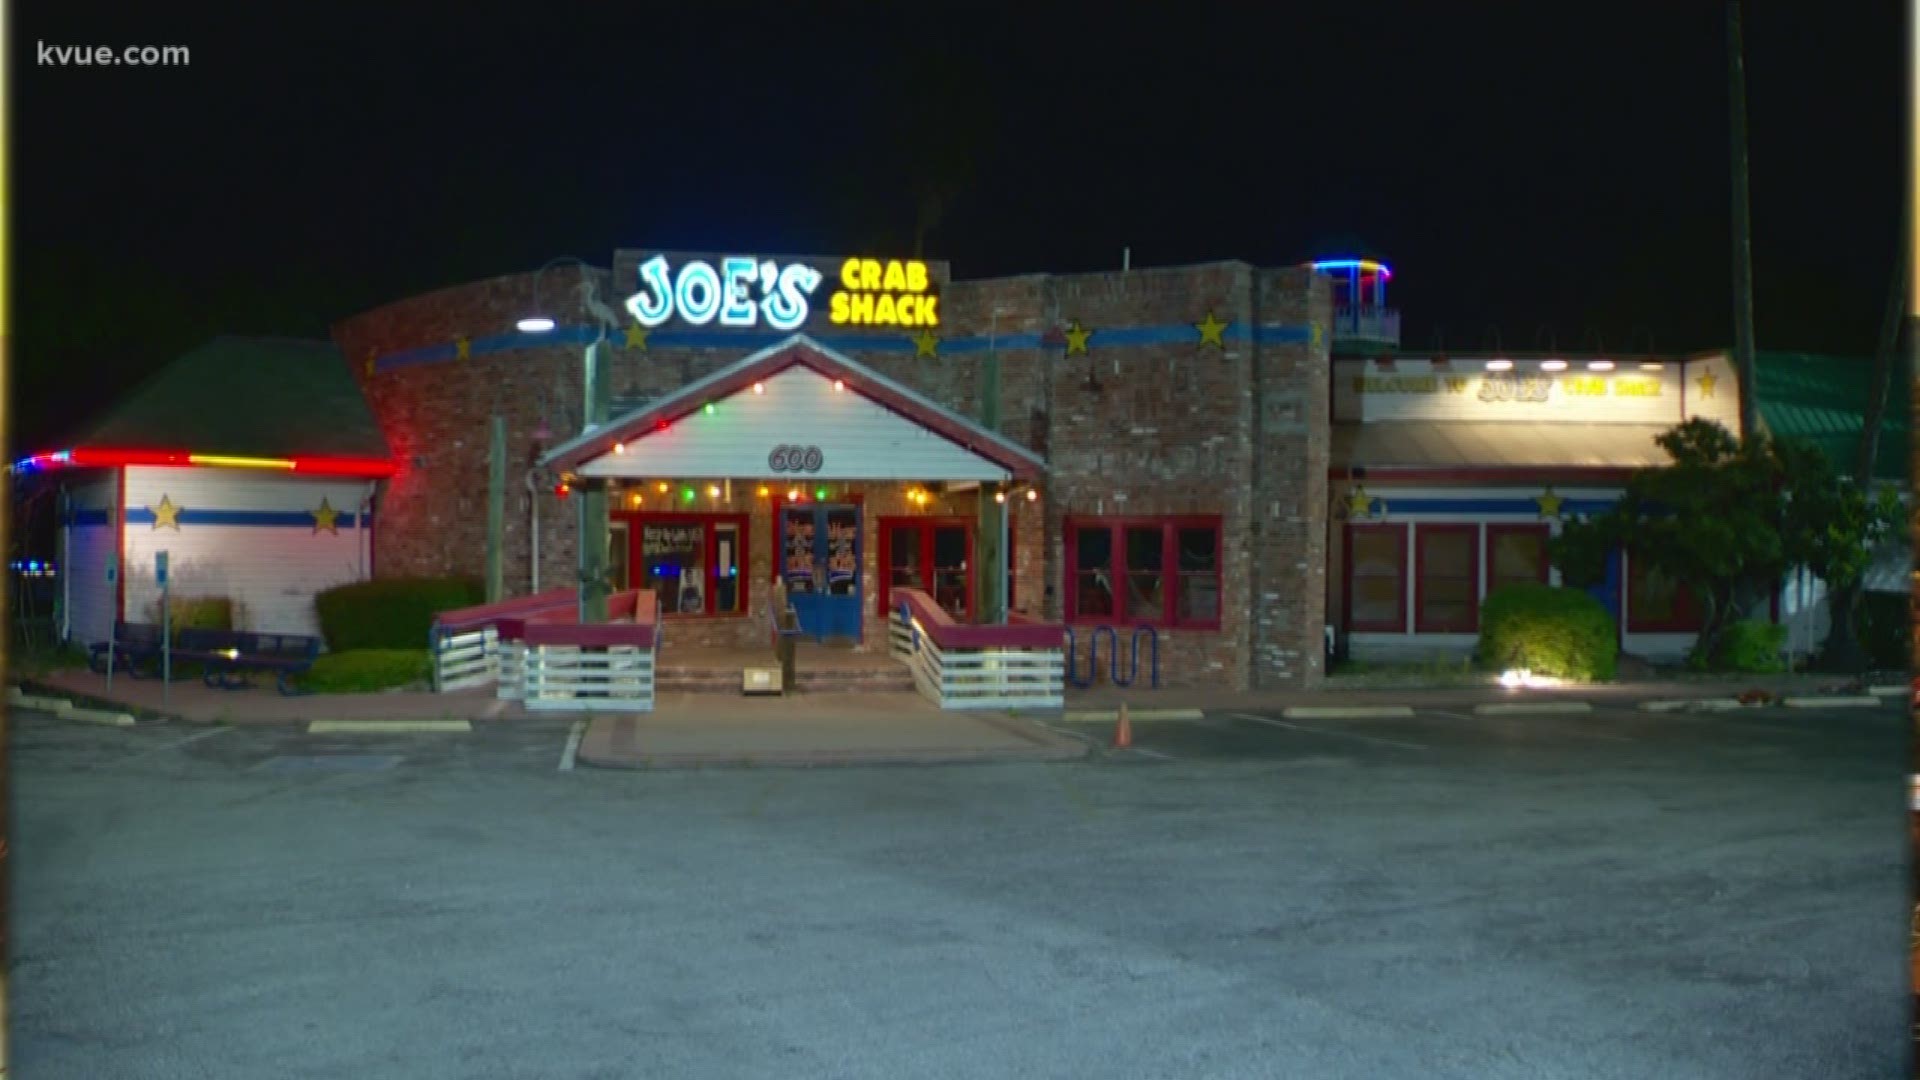 After a 16-year run, Joe’s Crab Shack is going out of business because it can’t pay the high rent in Austin.